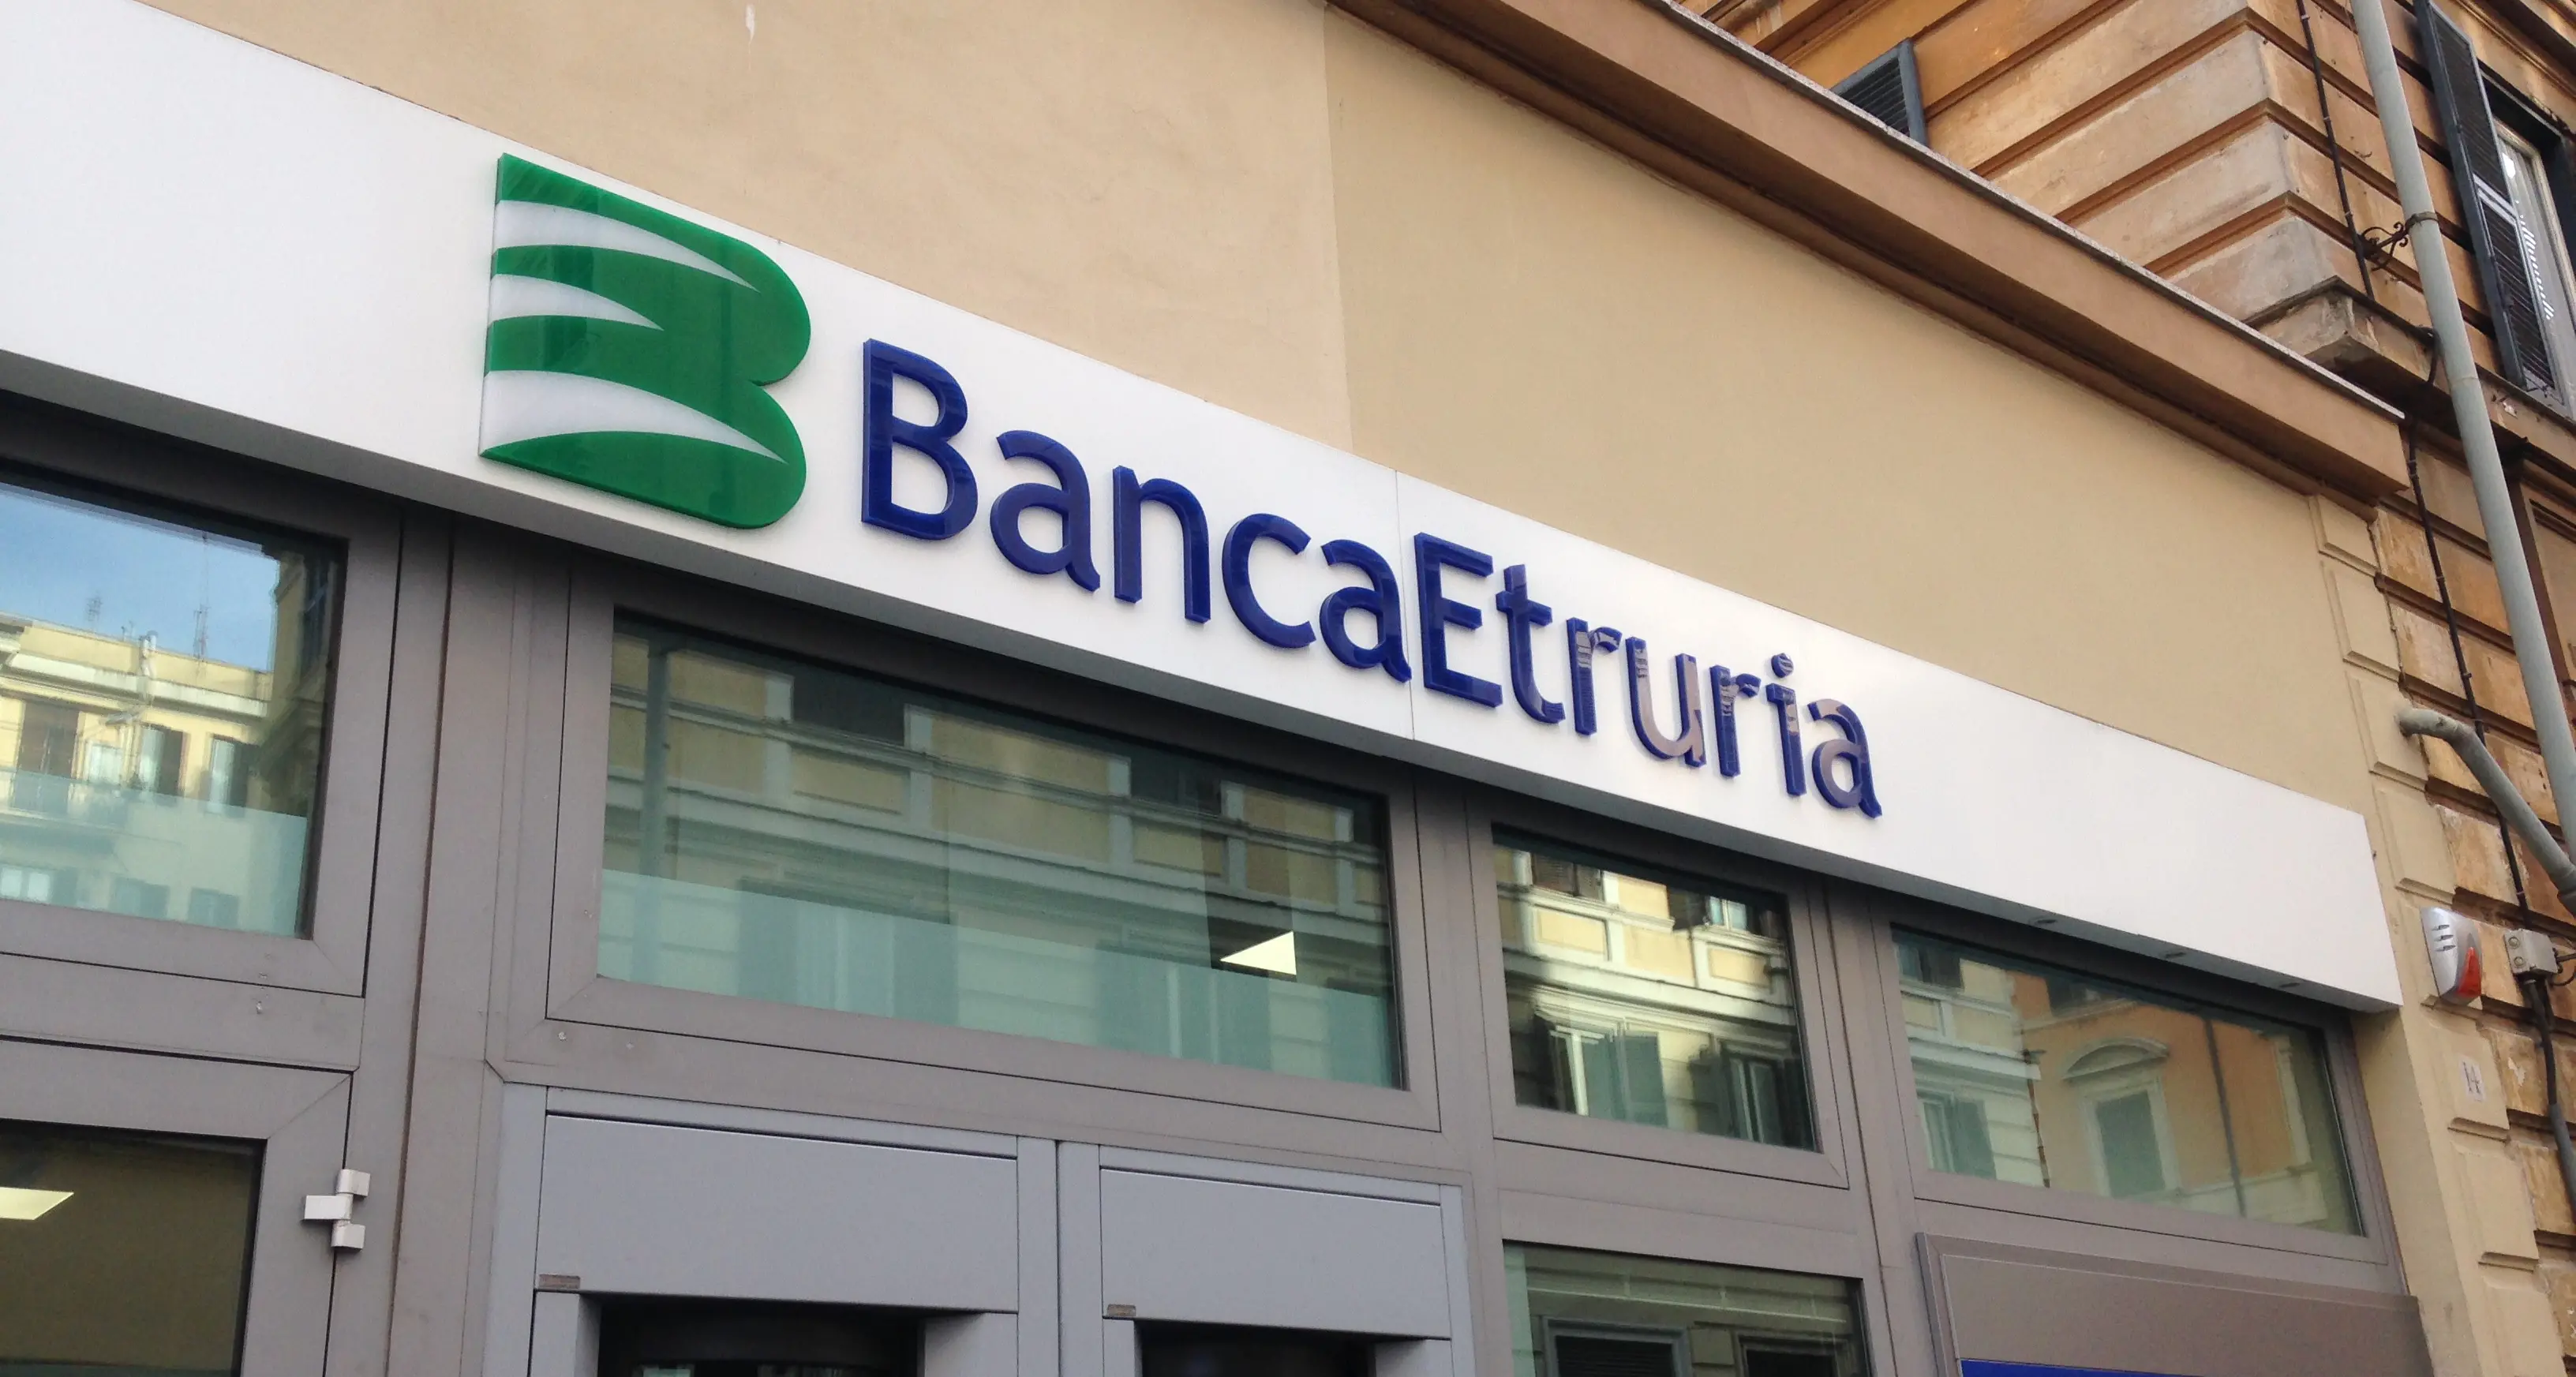 Banche, le colpe dei manager